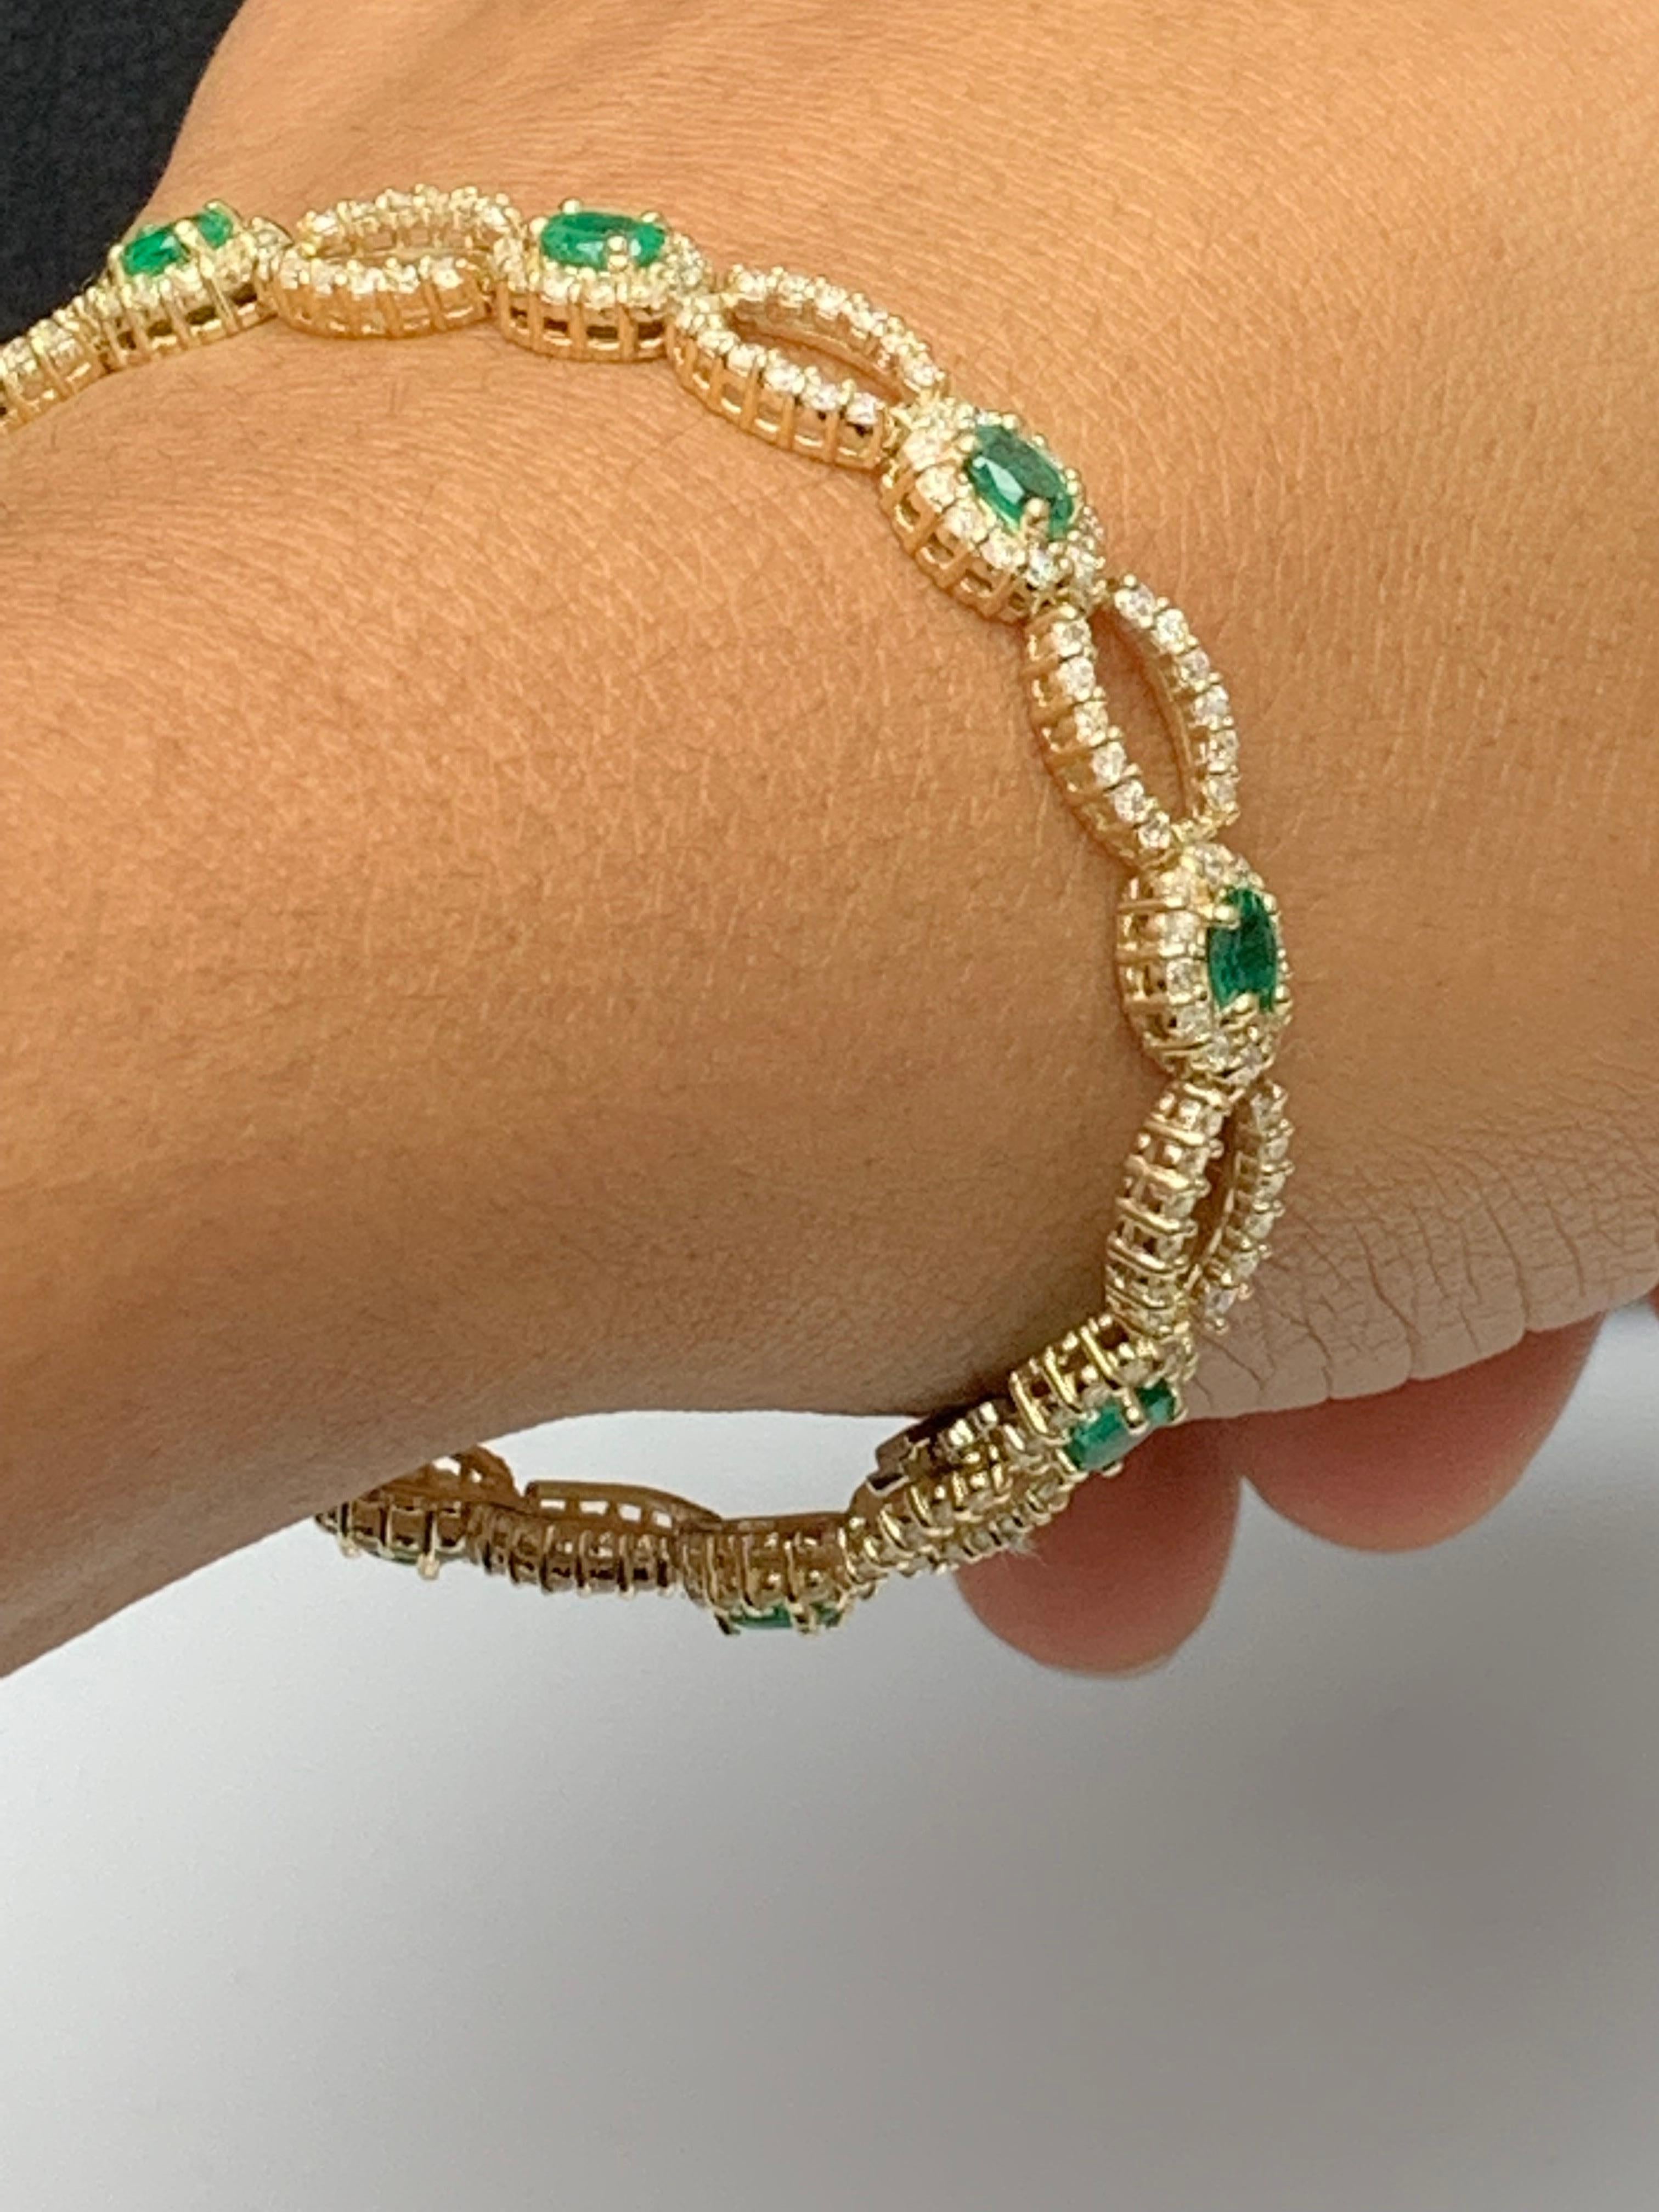 Open-Work 2.13 Carat Emerald and Diamond Bracelet in 14K Yellow Gold For Sale 5